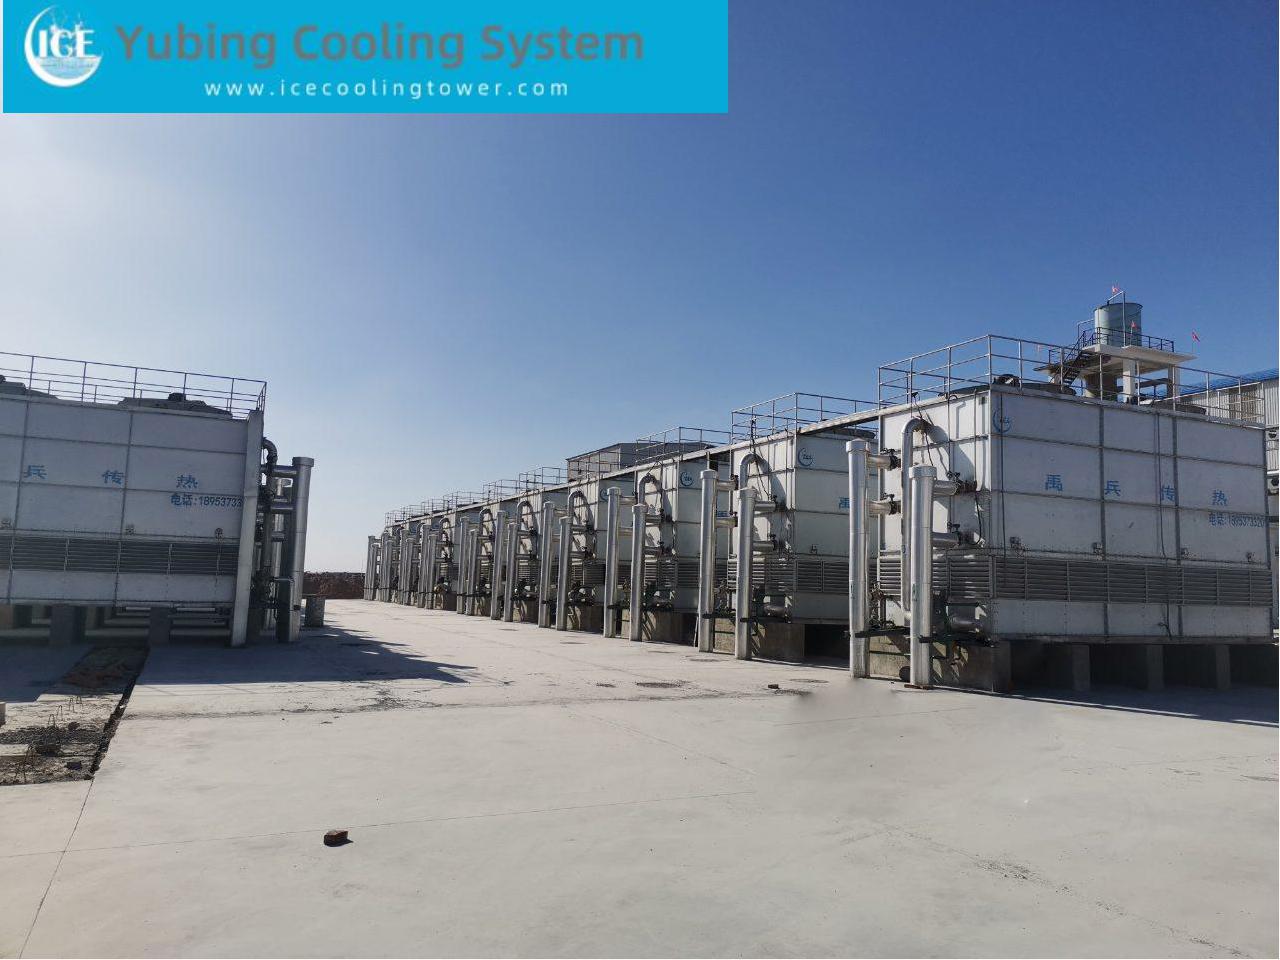 ICE cross-flow Closed Circuit Cooling Tower System applied in chemical plant